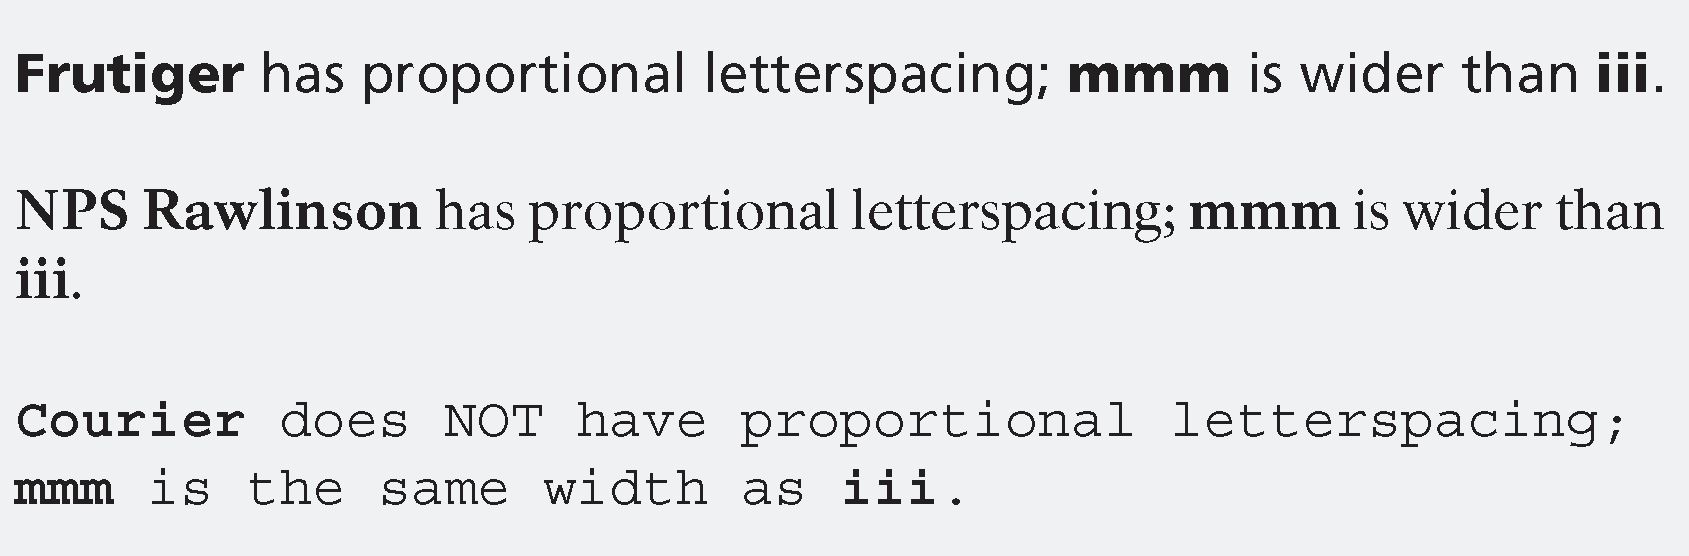 Examples of proportional spacing for Frutigier, NPS Rawlinson and Courier, using 3 "m"s and 3 "i"s. For Frutiger and NPS Rawlinson the letter space for the "m" is wider than the "i," making each letter appear even and in proportion to one another. For Courier, because the letter spacing is not proportional, the 3 "m"s when placed next too each other are significantly closer together than when the 3 "i"s are placed next to each other. 